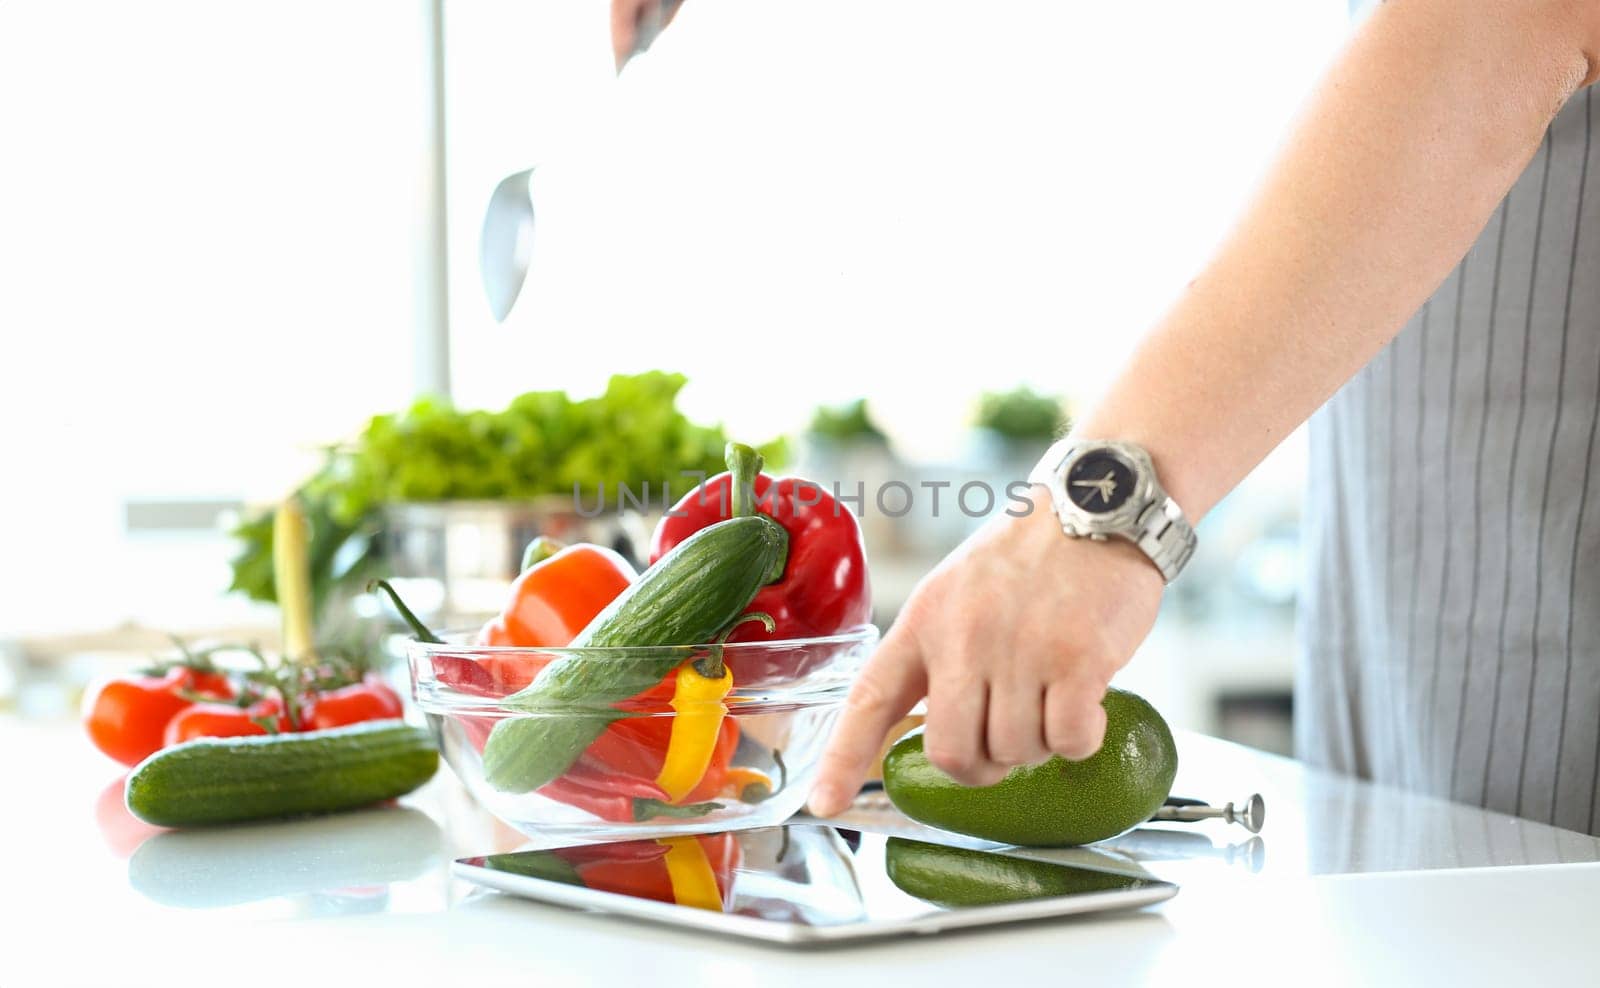 Chef following recipe on digital tablet preparing vegetable salad in kitchen. Online cooking course and recipe app